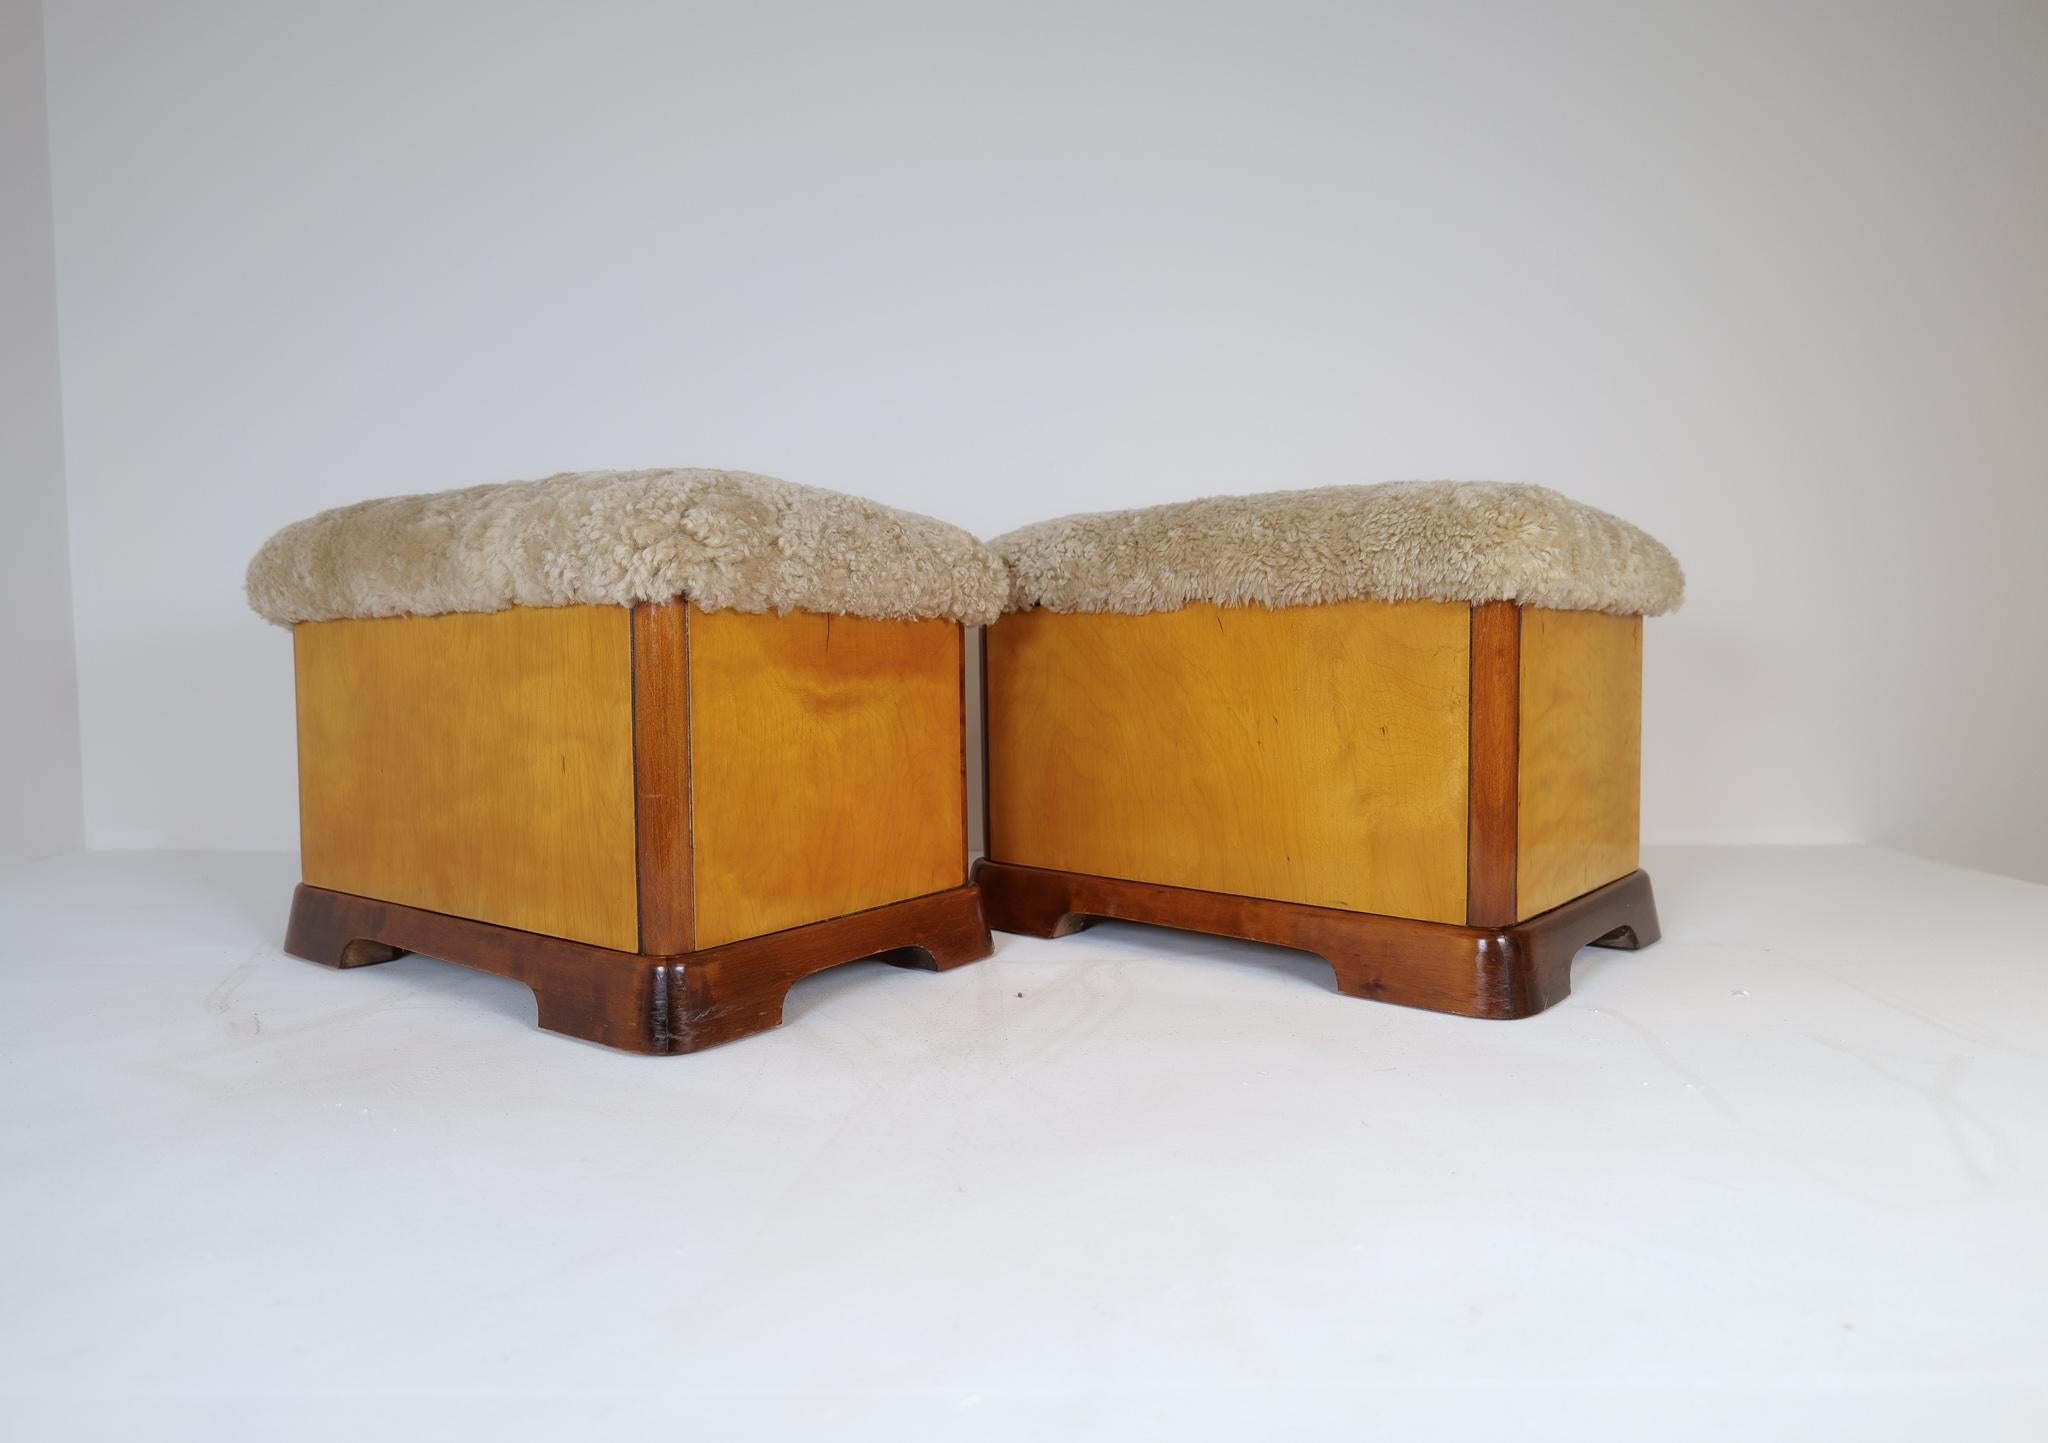 Swedish Art Deco Stools in Lacquered Birch and Sheepskin/Shearling Seat 1940s For Sale 13